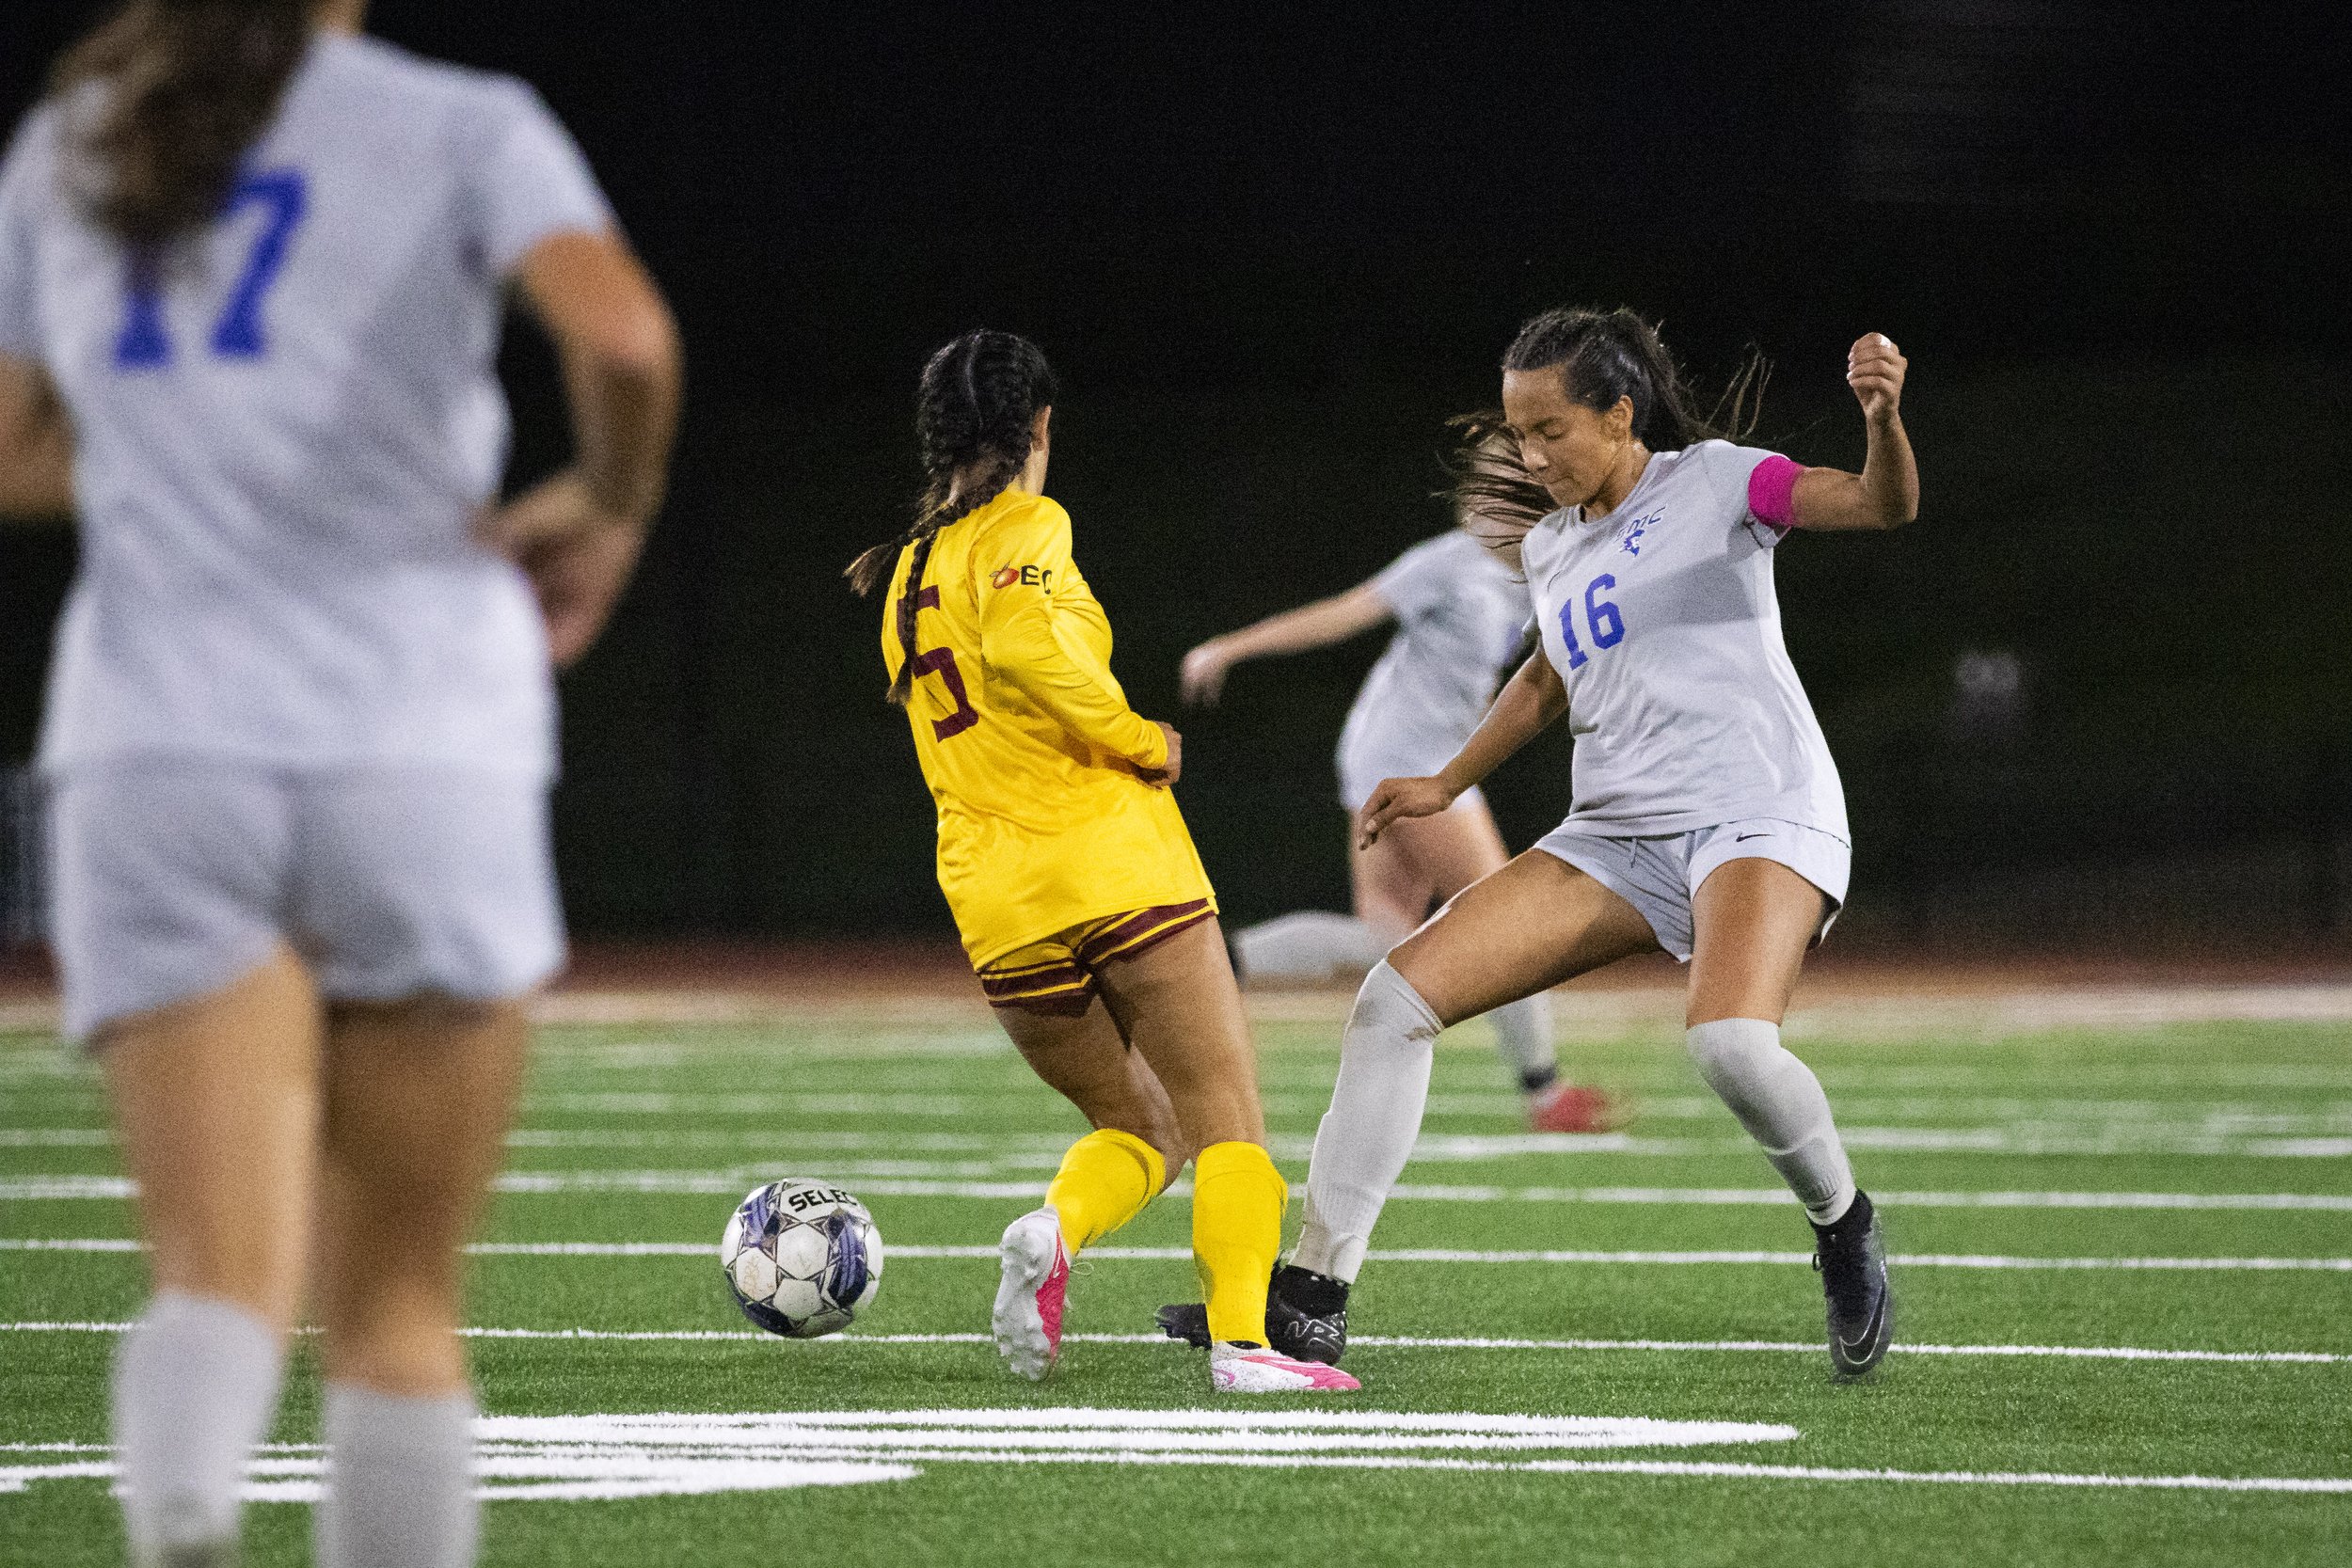  Santa Monica College Corsair defense Bella Velazco (right) looses control of the ball to Saddleback College Bobcat midfielder Danyela Jara (left) in the first half of a soccer game at Saddleback College in Mission Viejo, Calif., on Tuesday, Nov. 21,